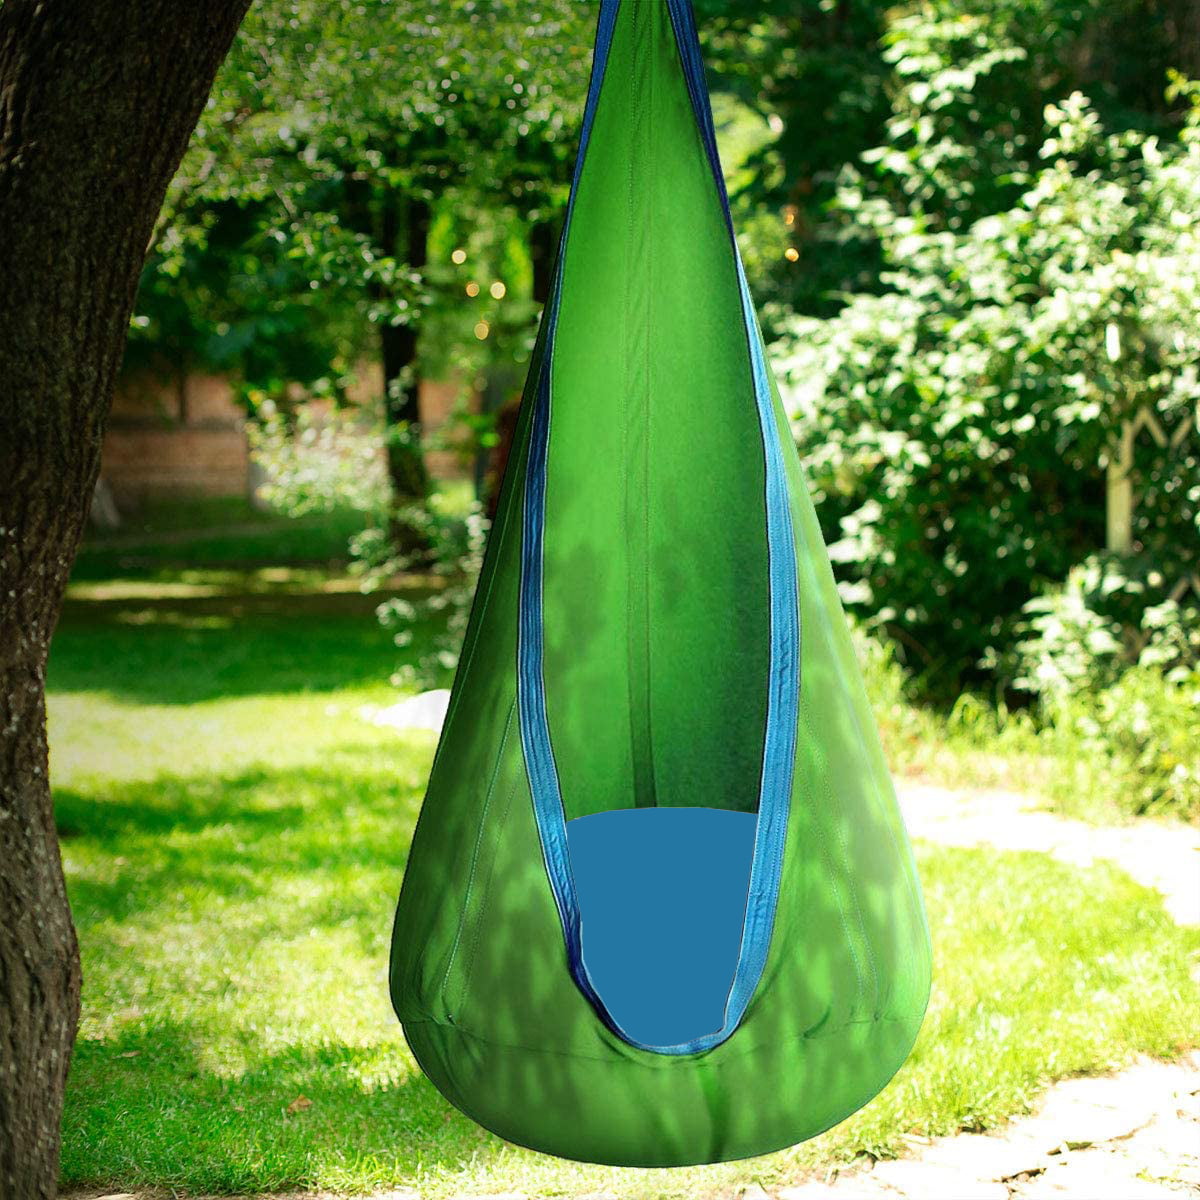 Kids Portable Outdoor Garden Hanging Chair Swing Chair With Inflatable Cushion 